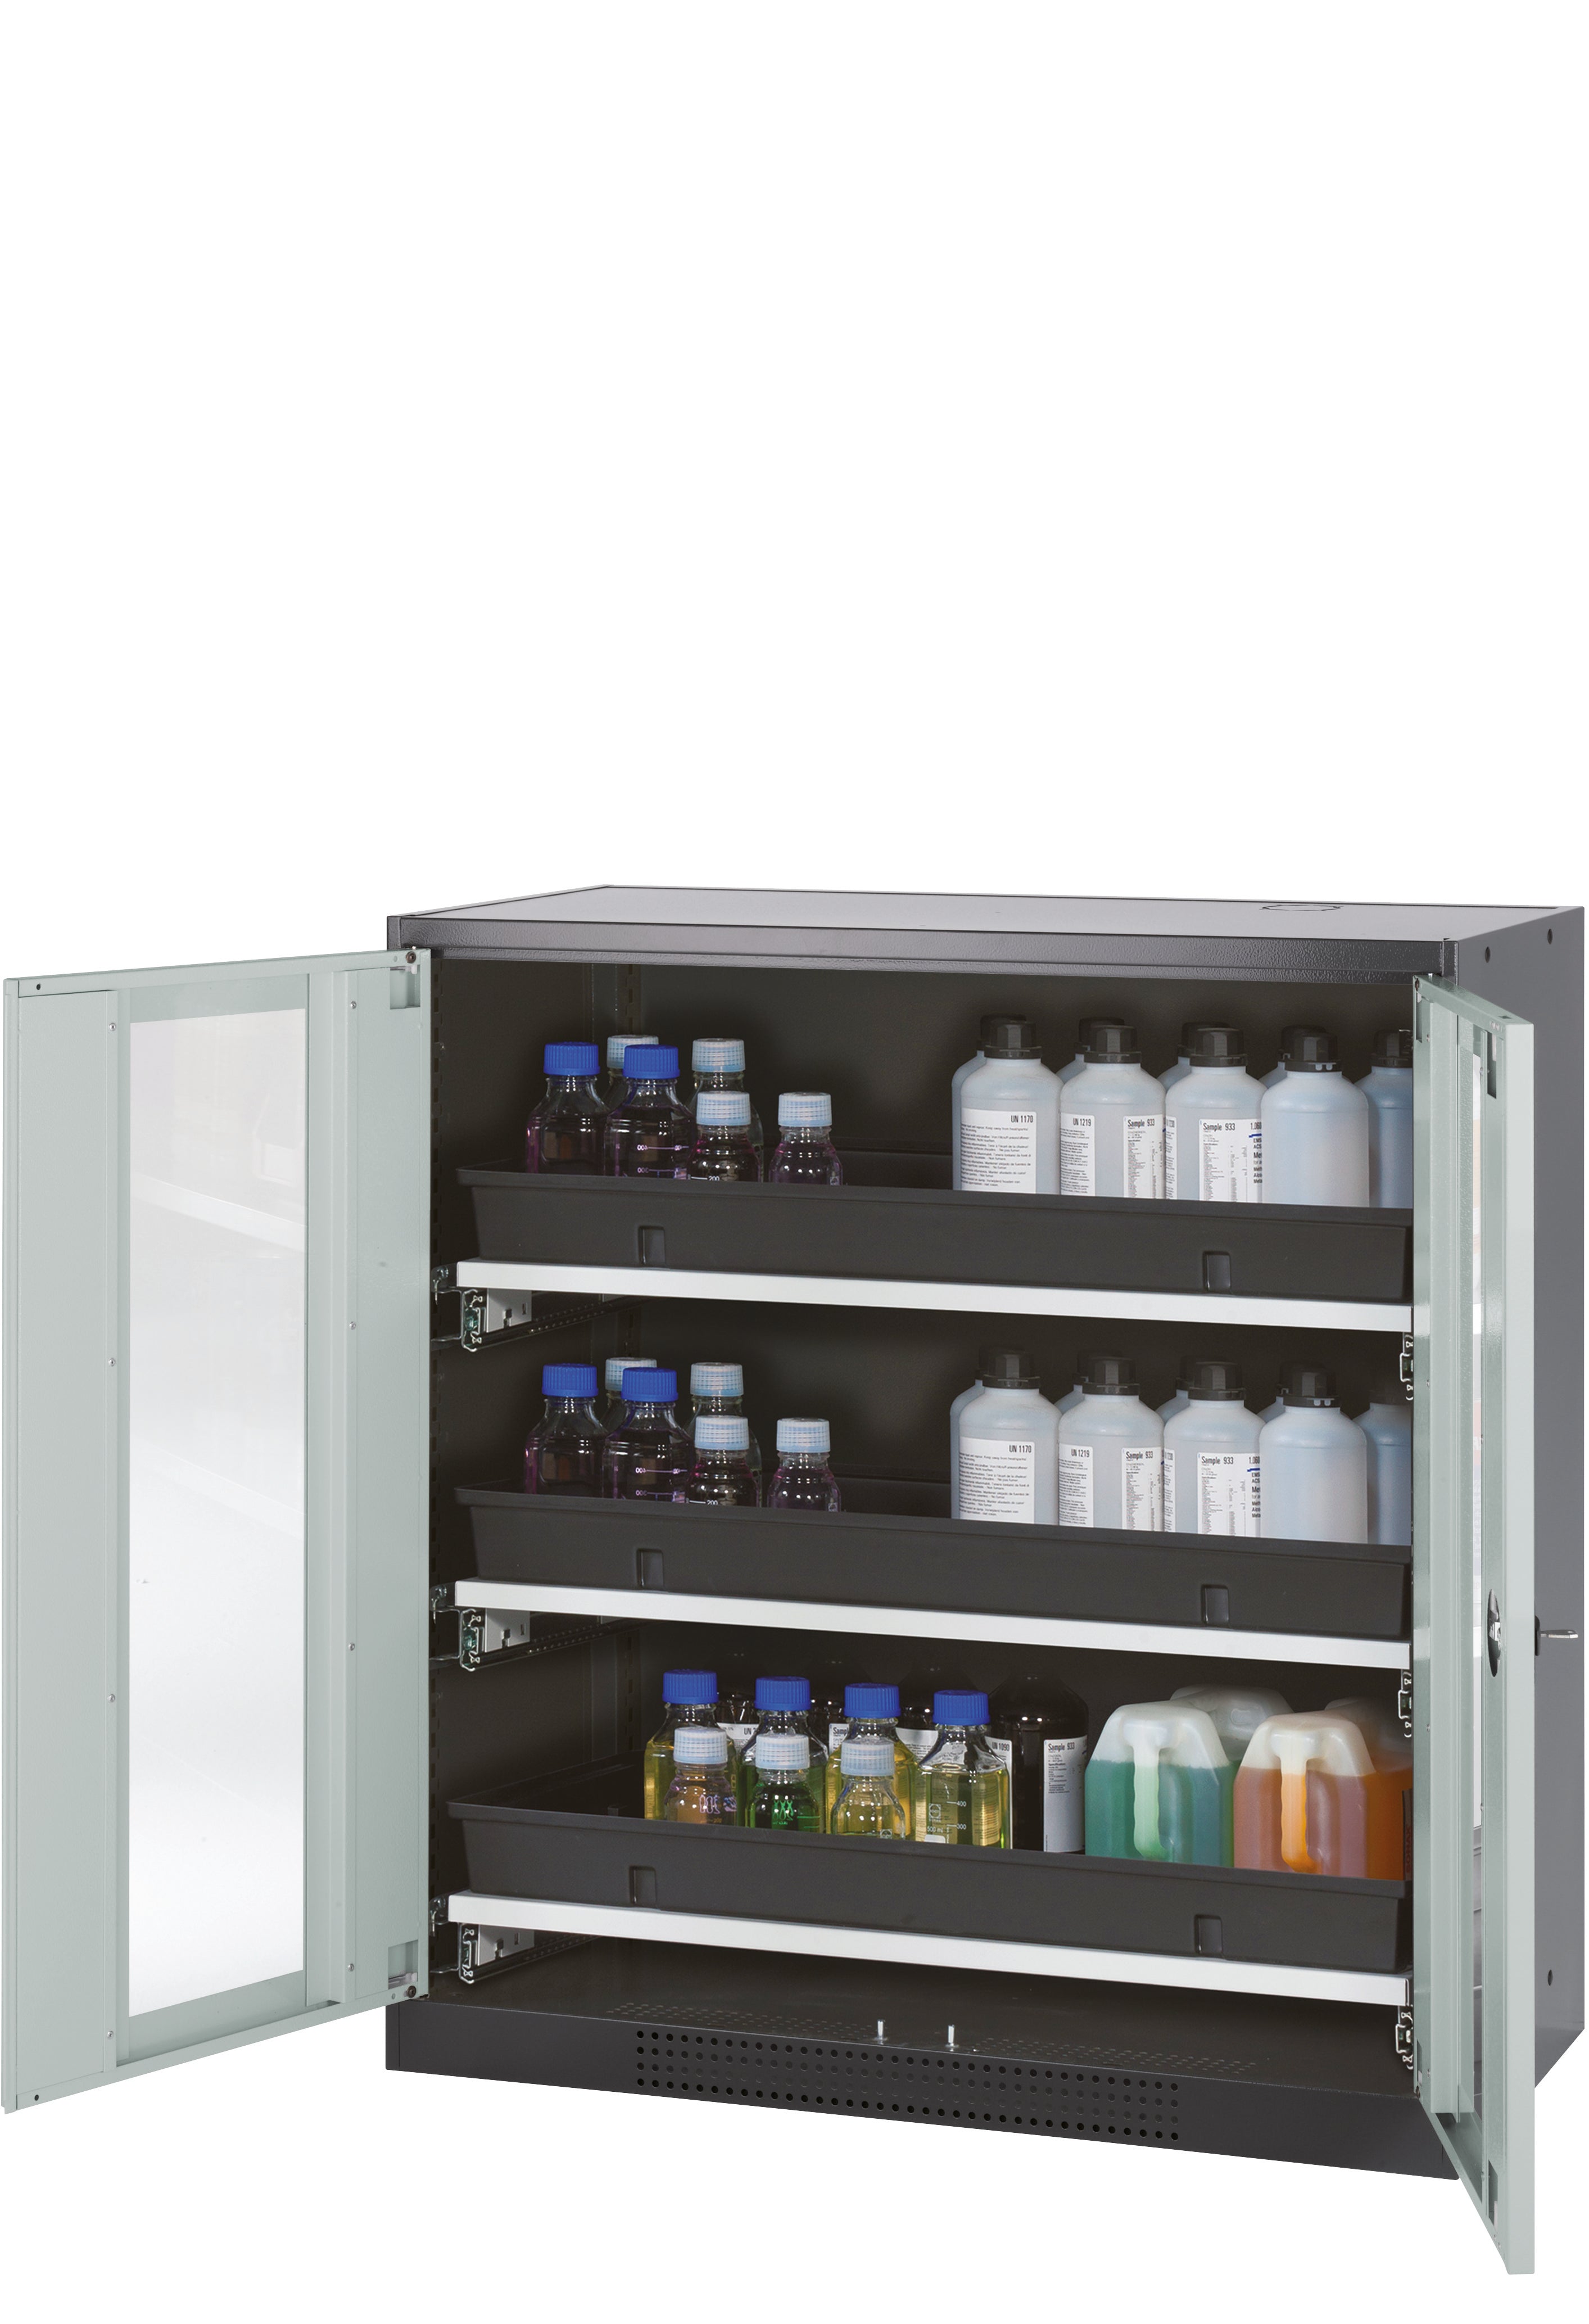 Chemical cabinet CS-CLASSIC-G model CS.110.105.WDFW in light gray RAL 7035 with 3x AbZ pull-out shelves (sheet steel/polypropylene)